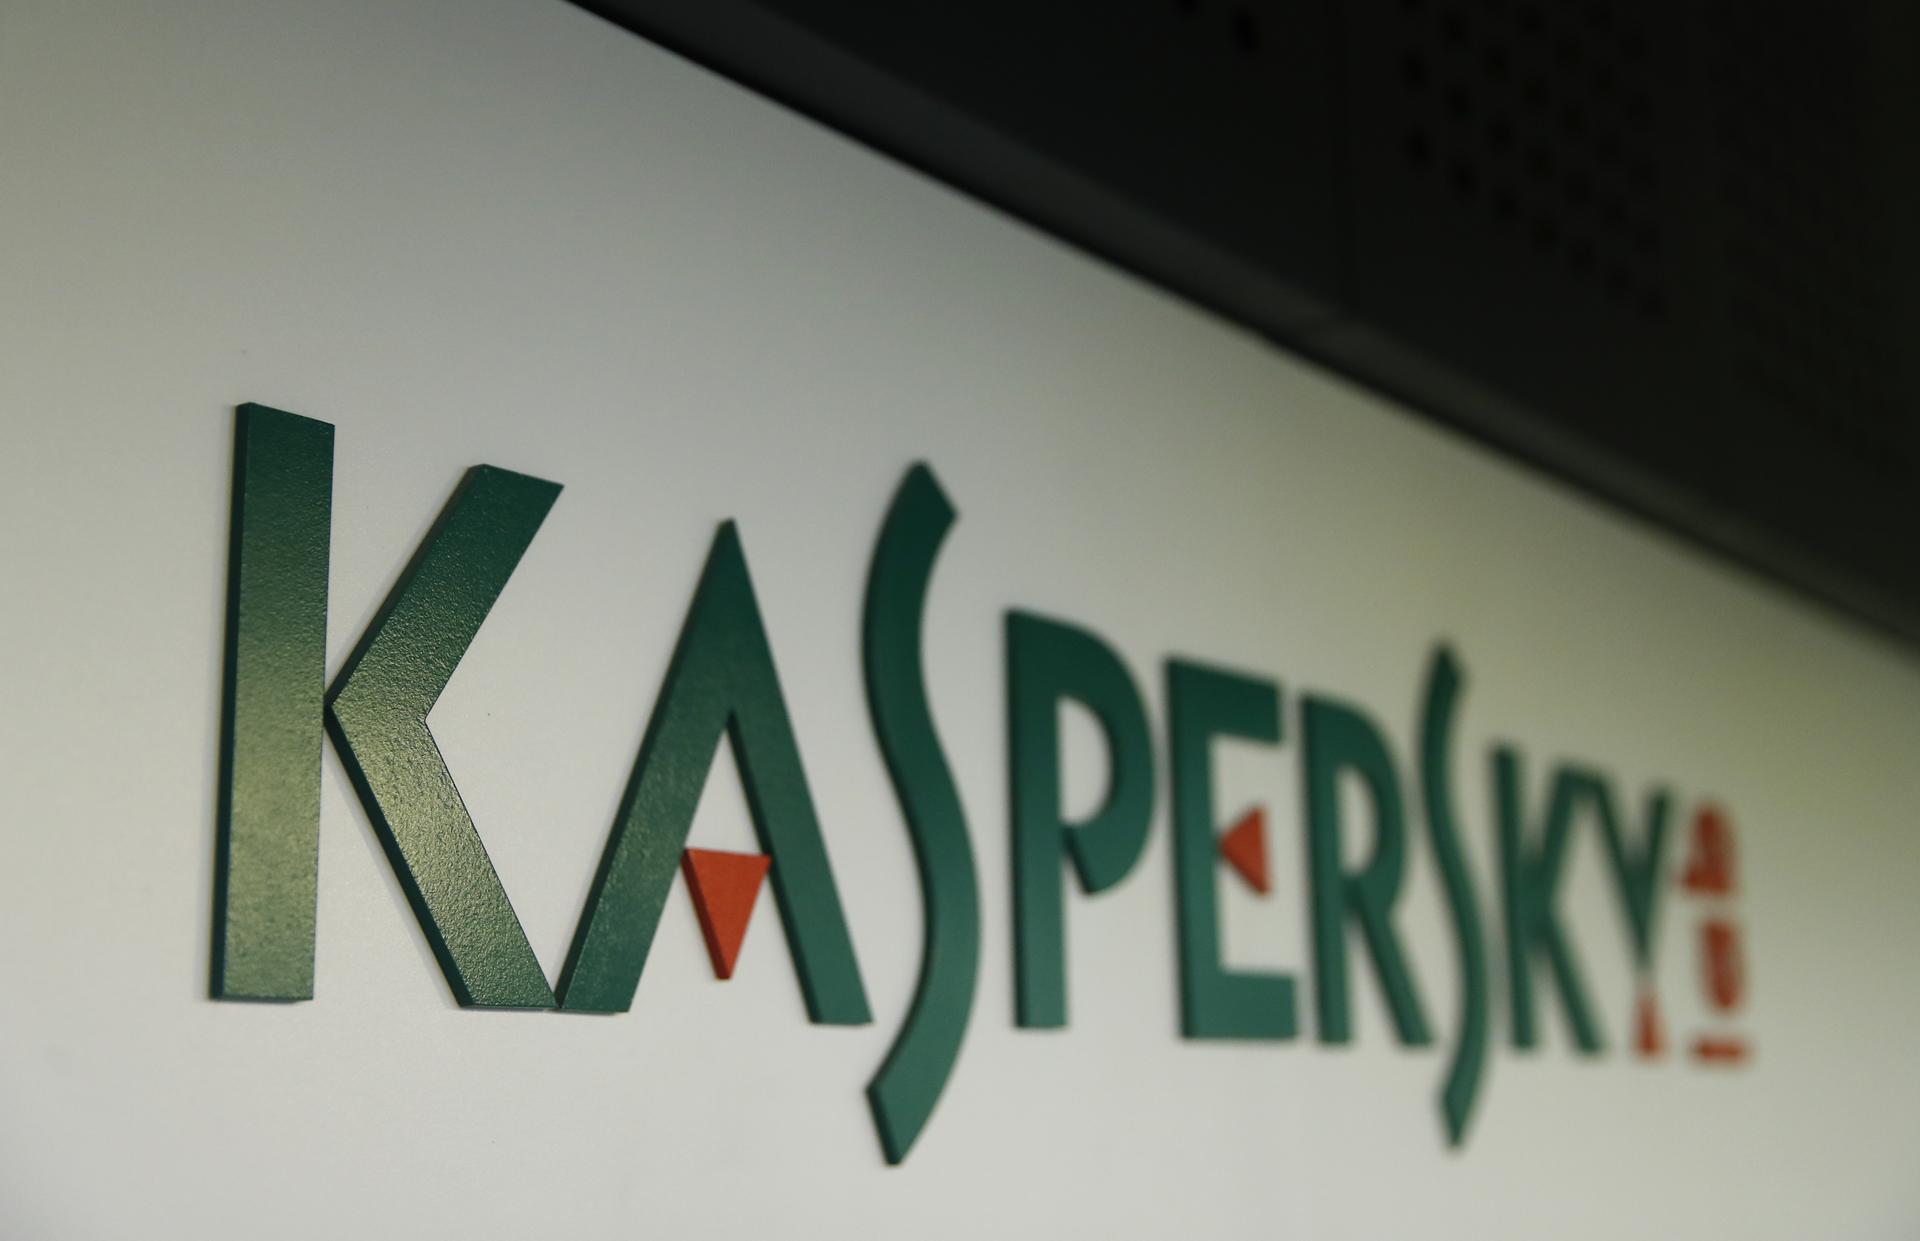 The logo of Russia's Kaspersky Lab